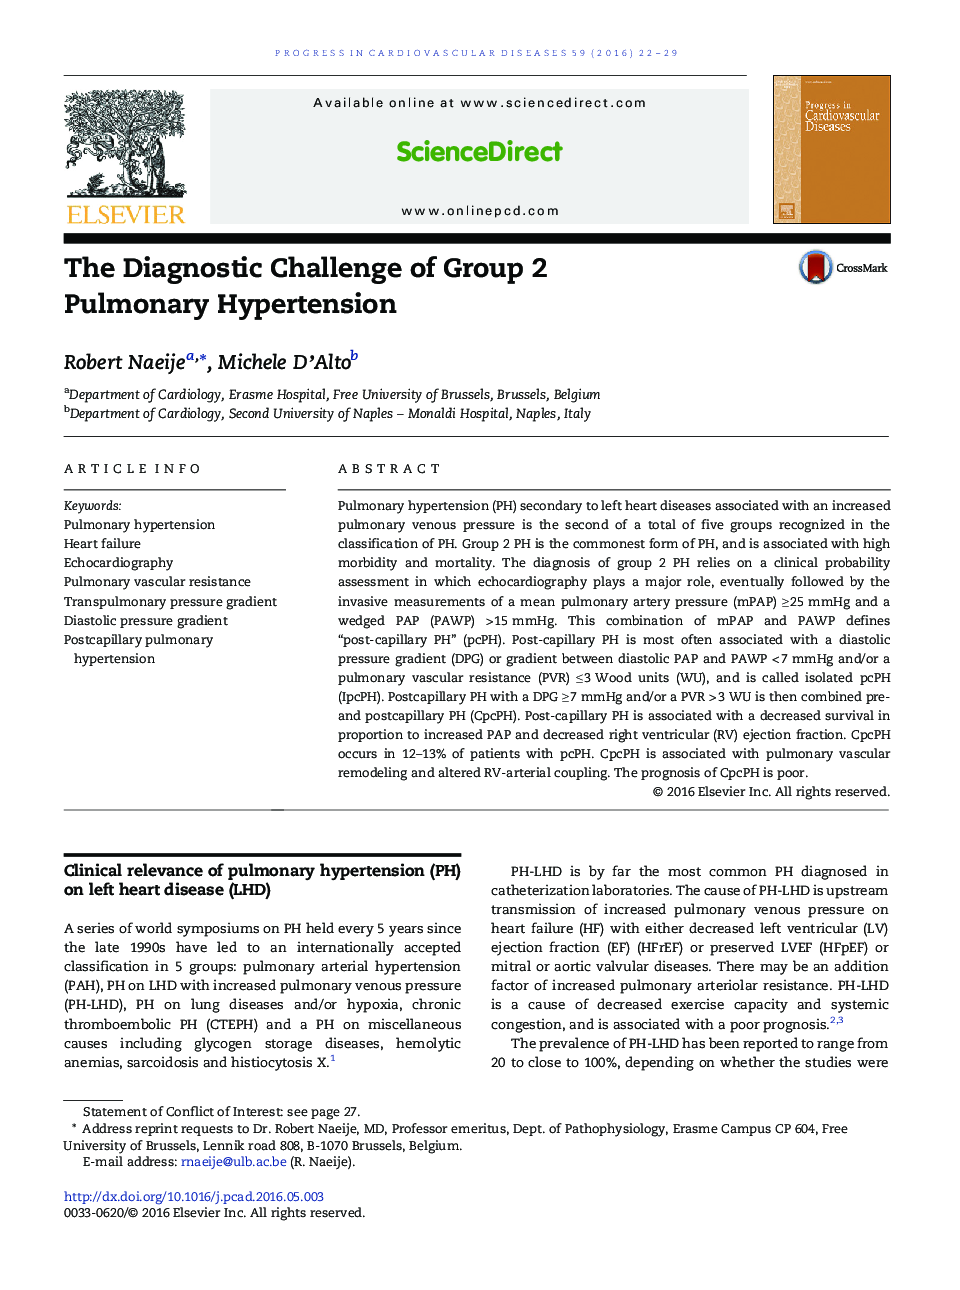 The Diagnostic Challenge of Group 2 Pulmonary Hypertension